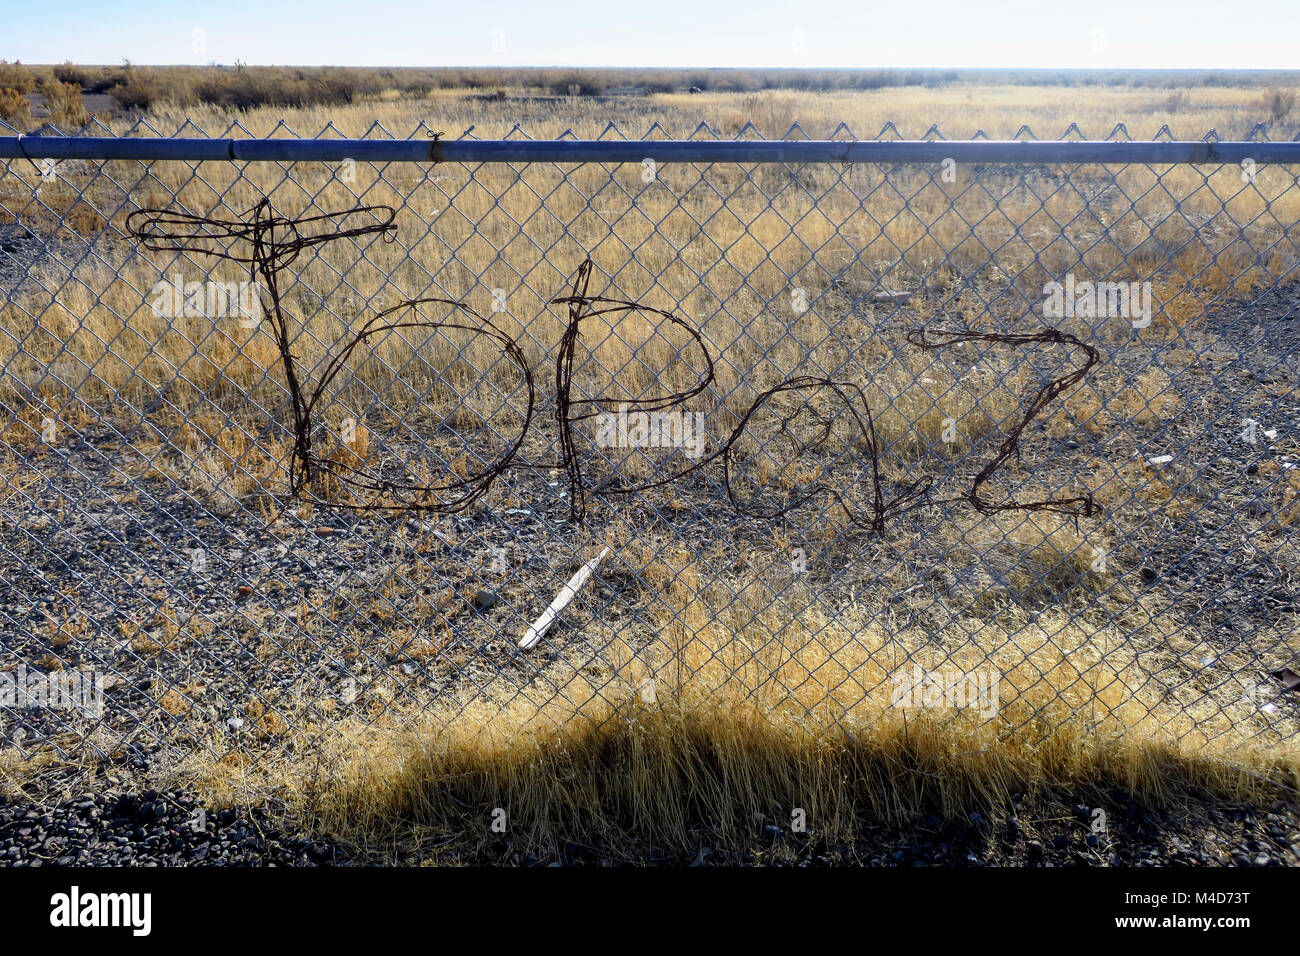 Topaz interment camp illustrated by wire on a fence near a monument in Central Utah. Stock Photo